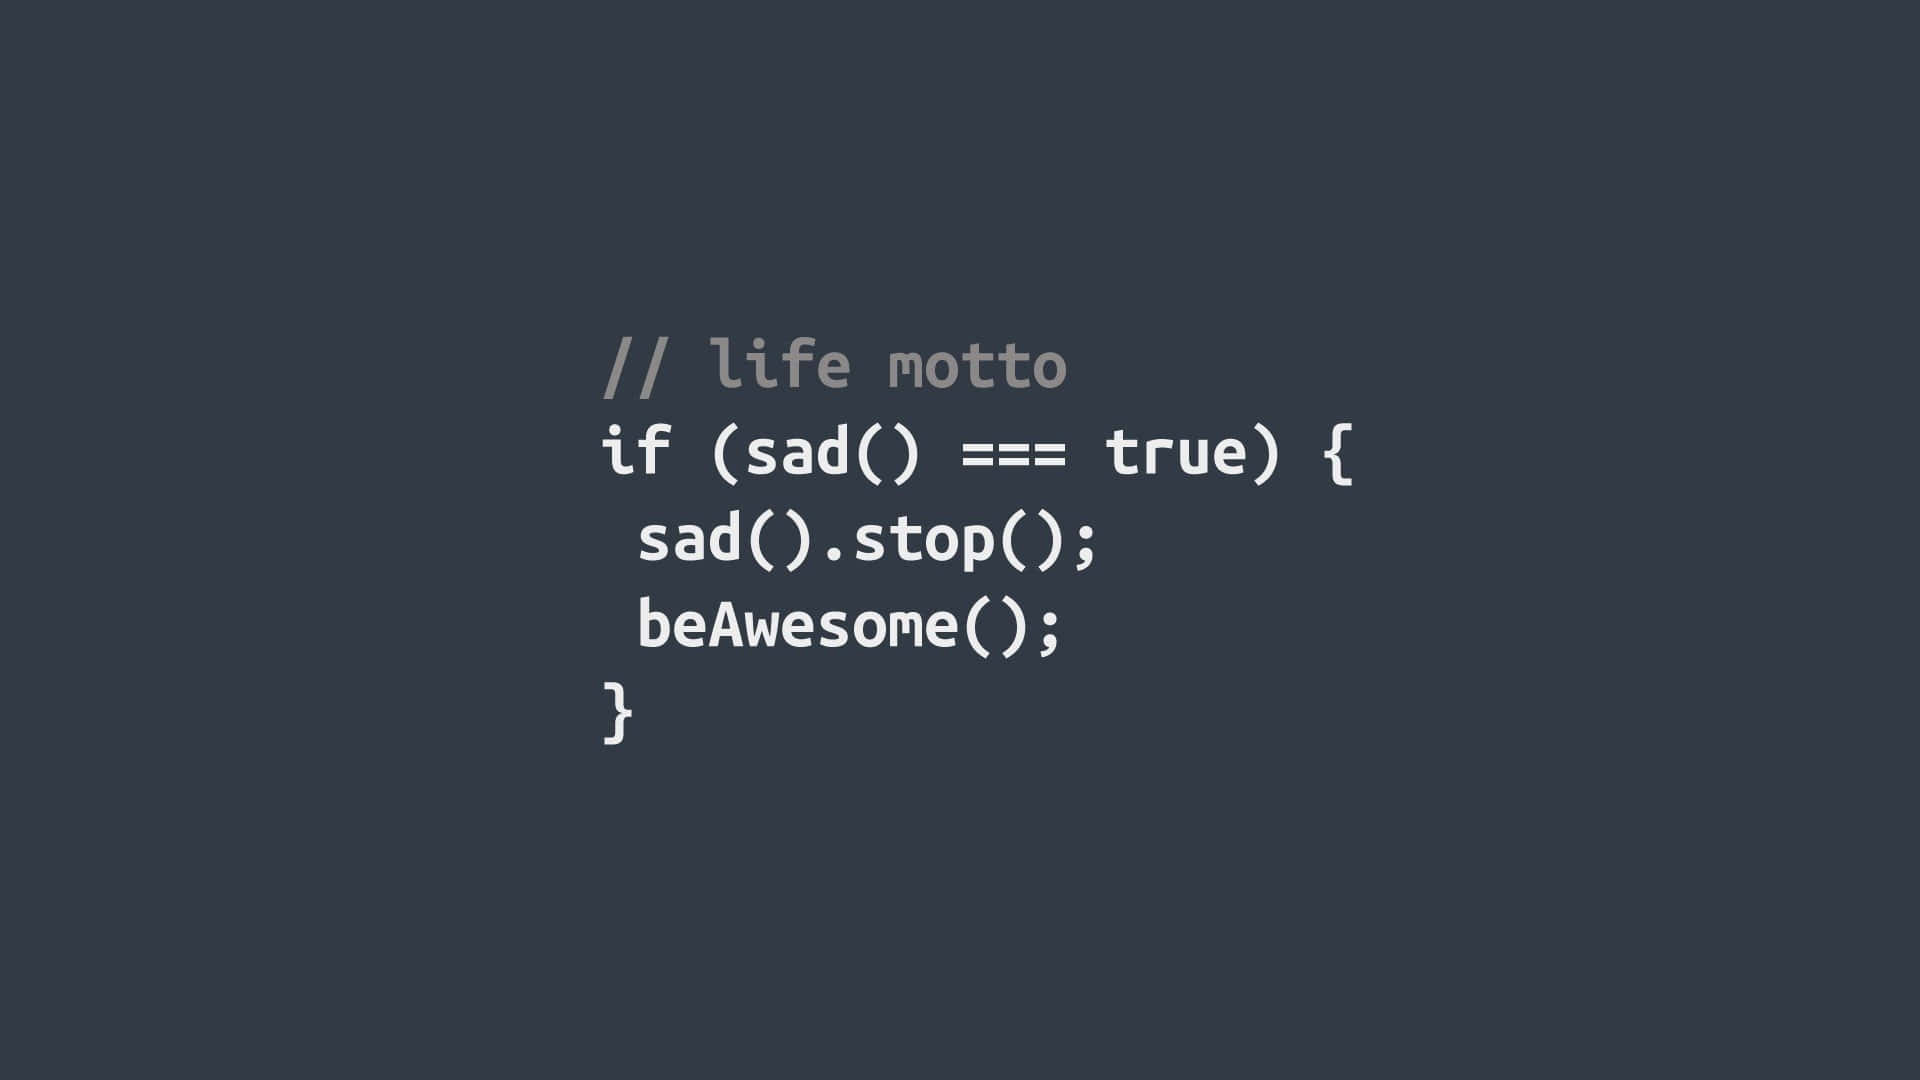 Code Motto About Life